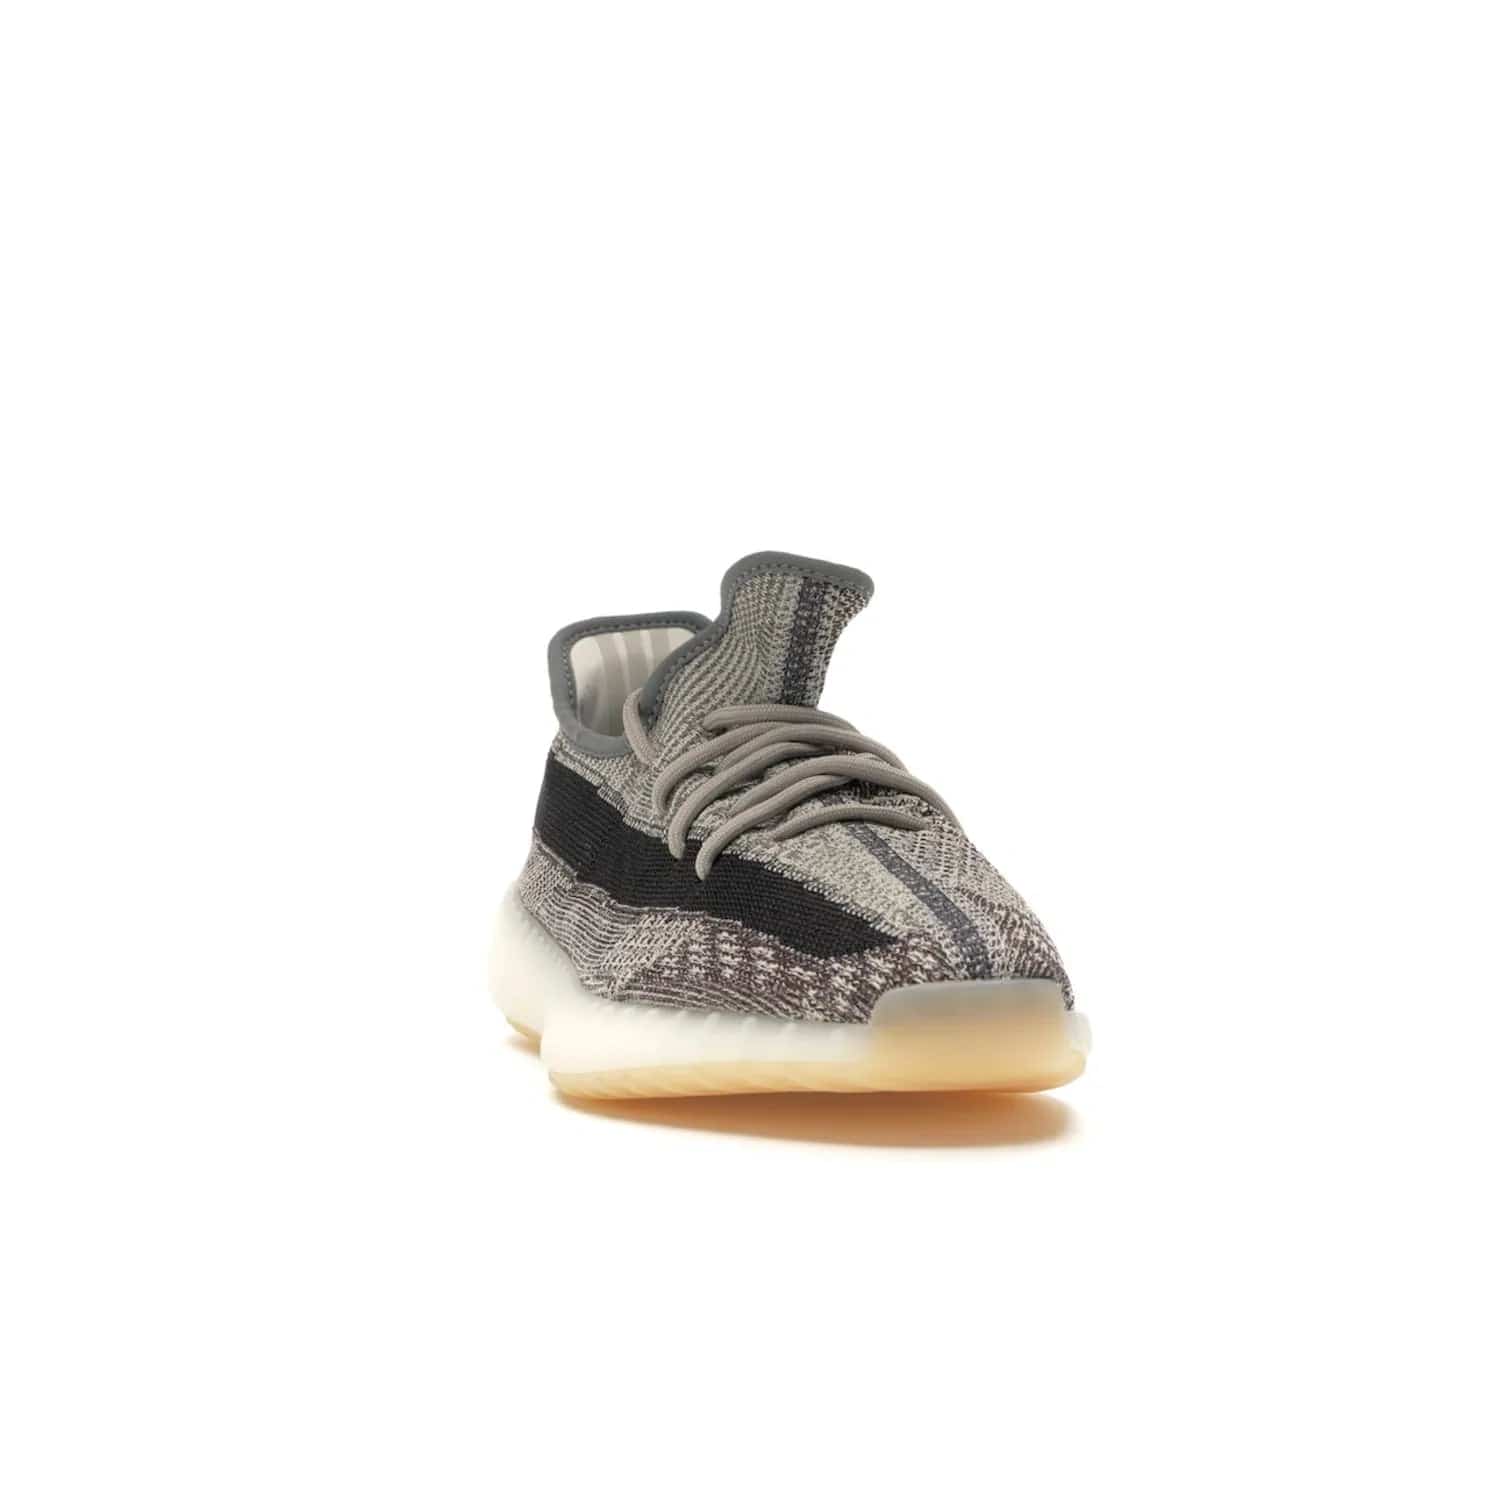 adidas Yeezy Boost 350 V2 Zyon - Image 8 - Only at www.BallersClubKickz.com - Step up your style game with the adidas Yeezy Boost 350 V2 Zyon. This sleek sneaker features a Primeknit upper, dark side stripe, translucent Boost sole, and creamy white interior providing style and comfort. Get them now!